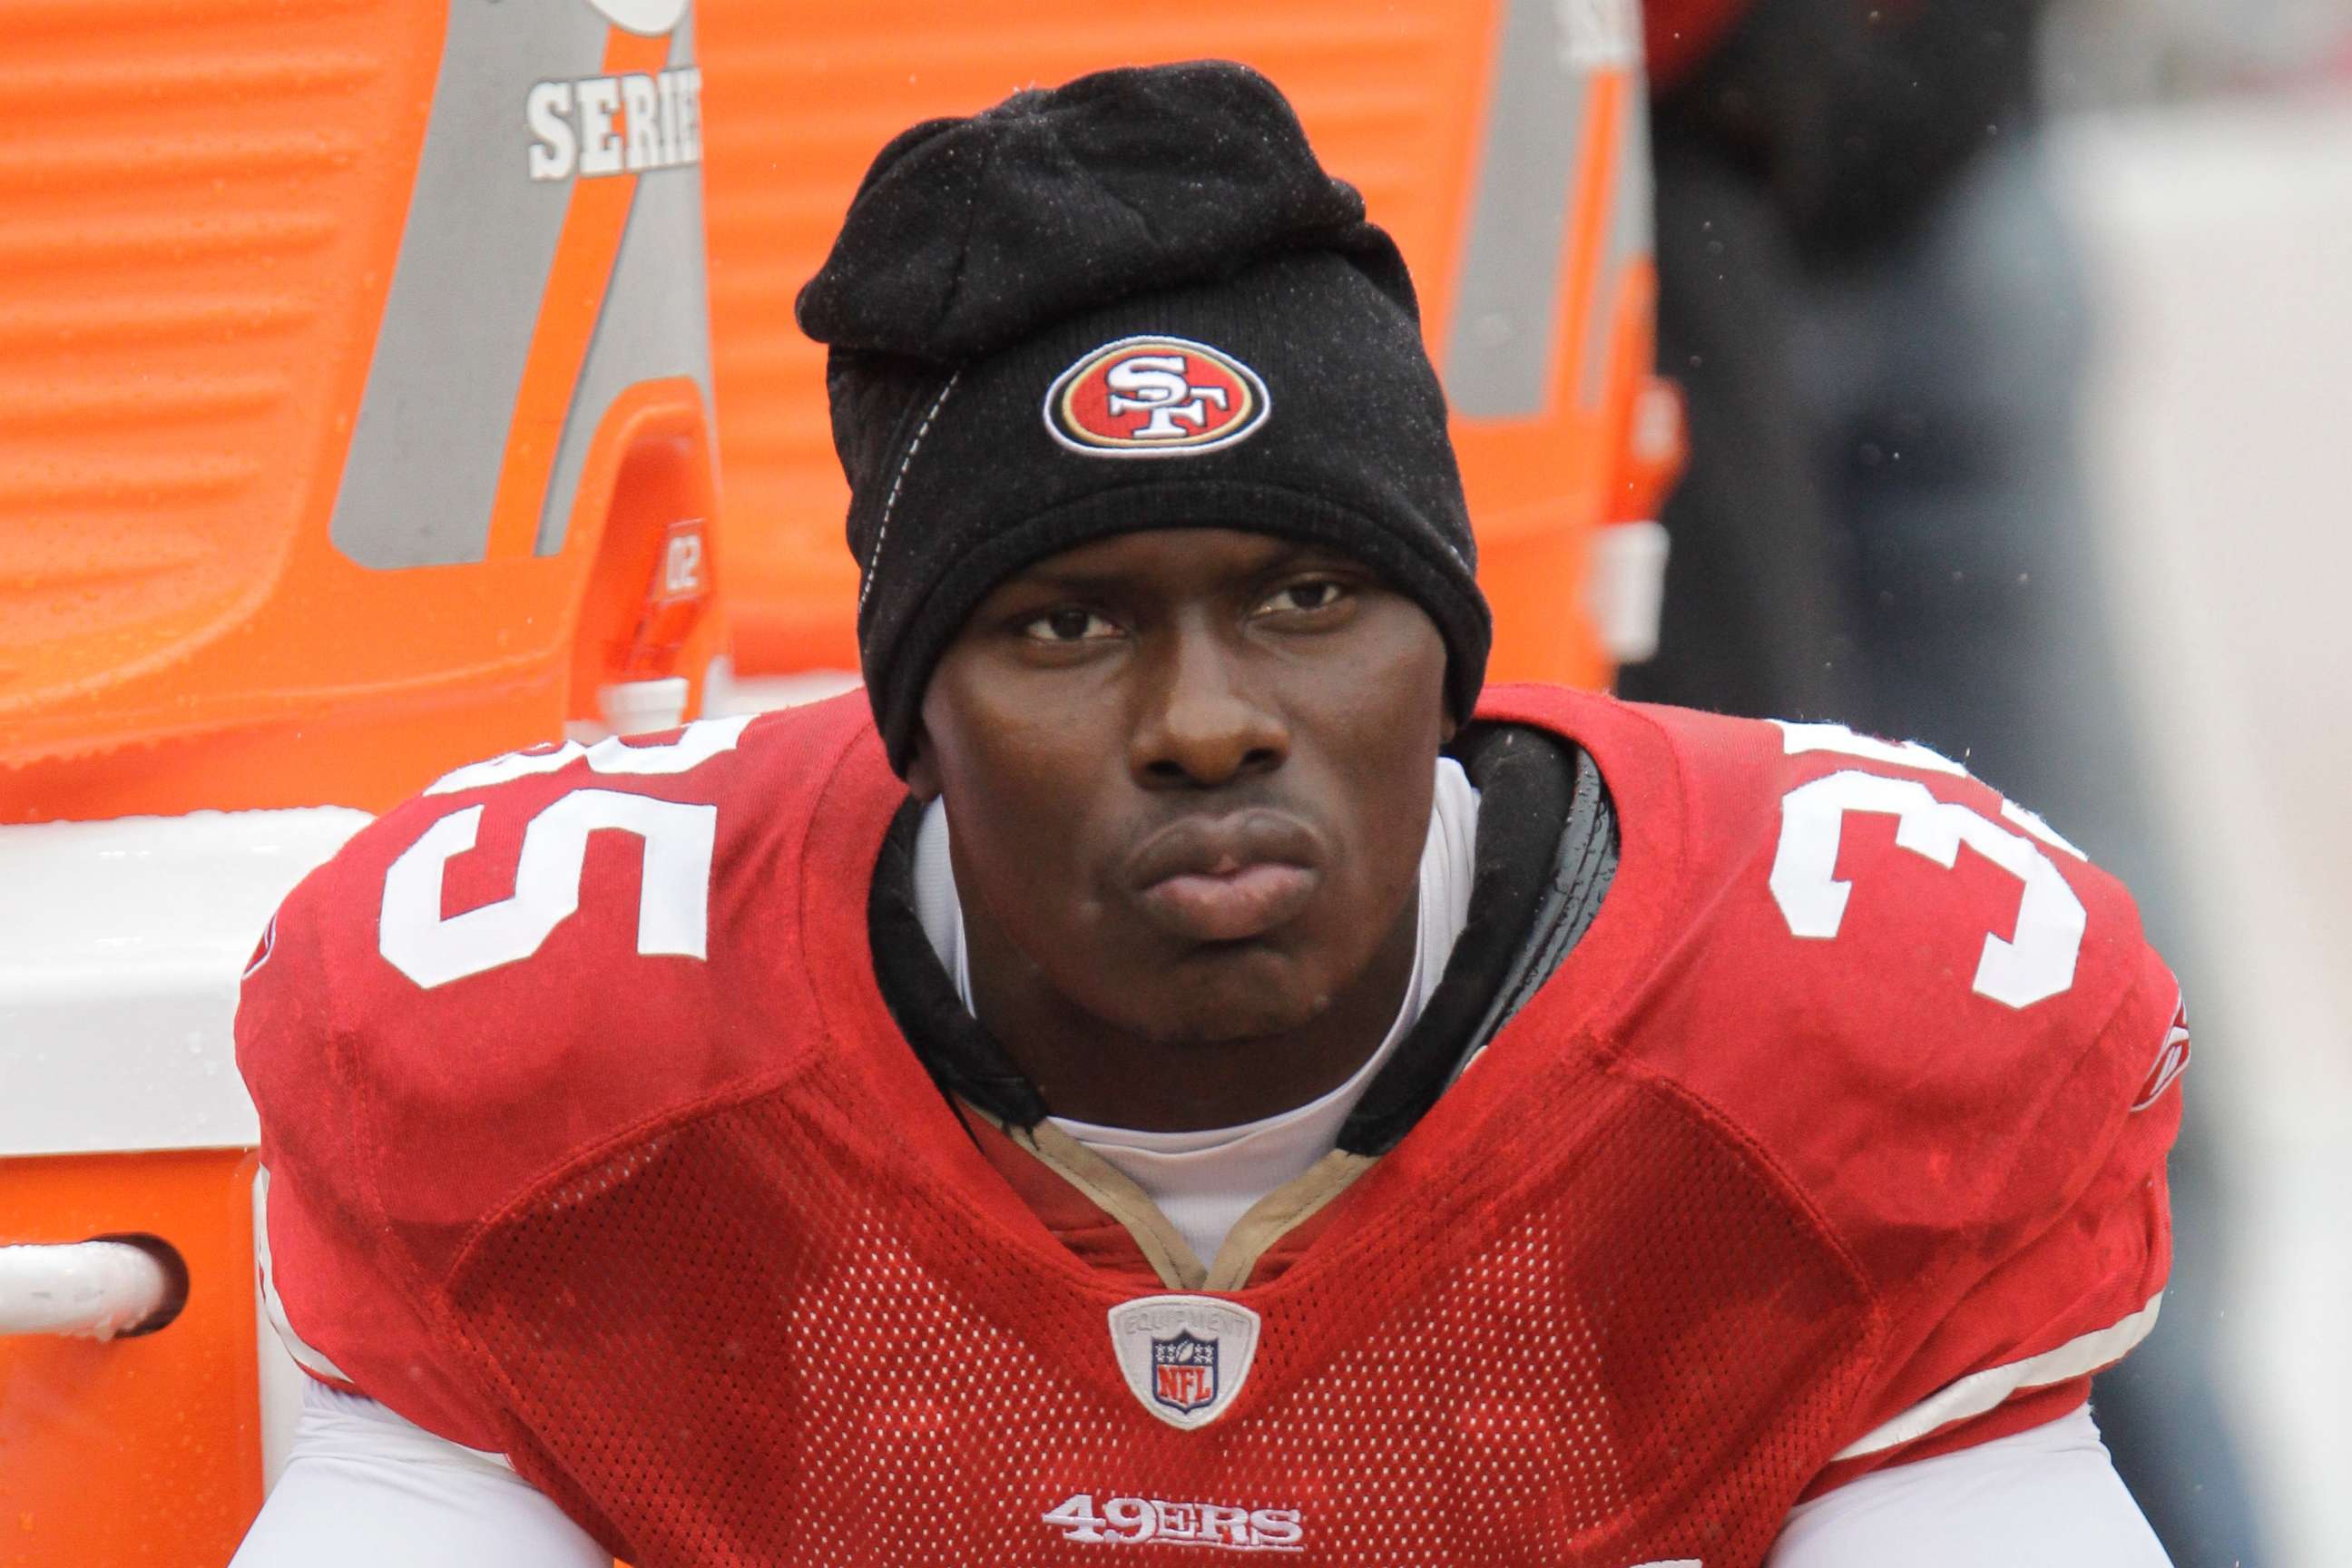 PHOTO: In this Oct. 17, 2010 file photo, San Francisco 49ers cornerback Phillip Adams sits on the sideline during the first quarter of an NFL football game in San Francisco.